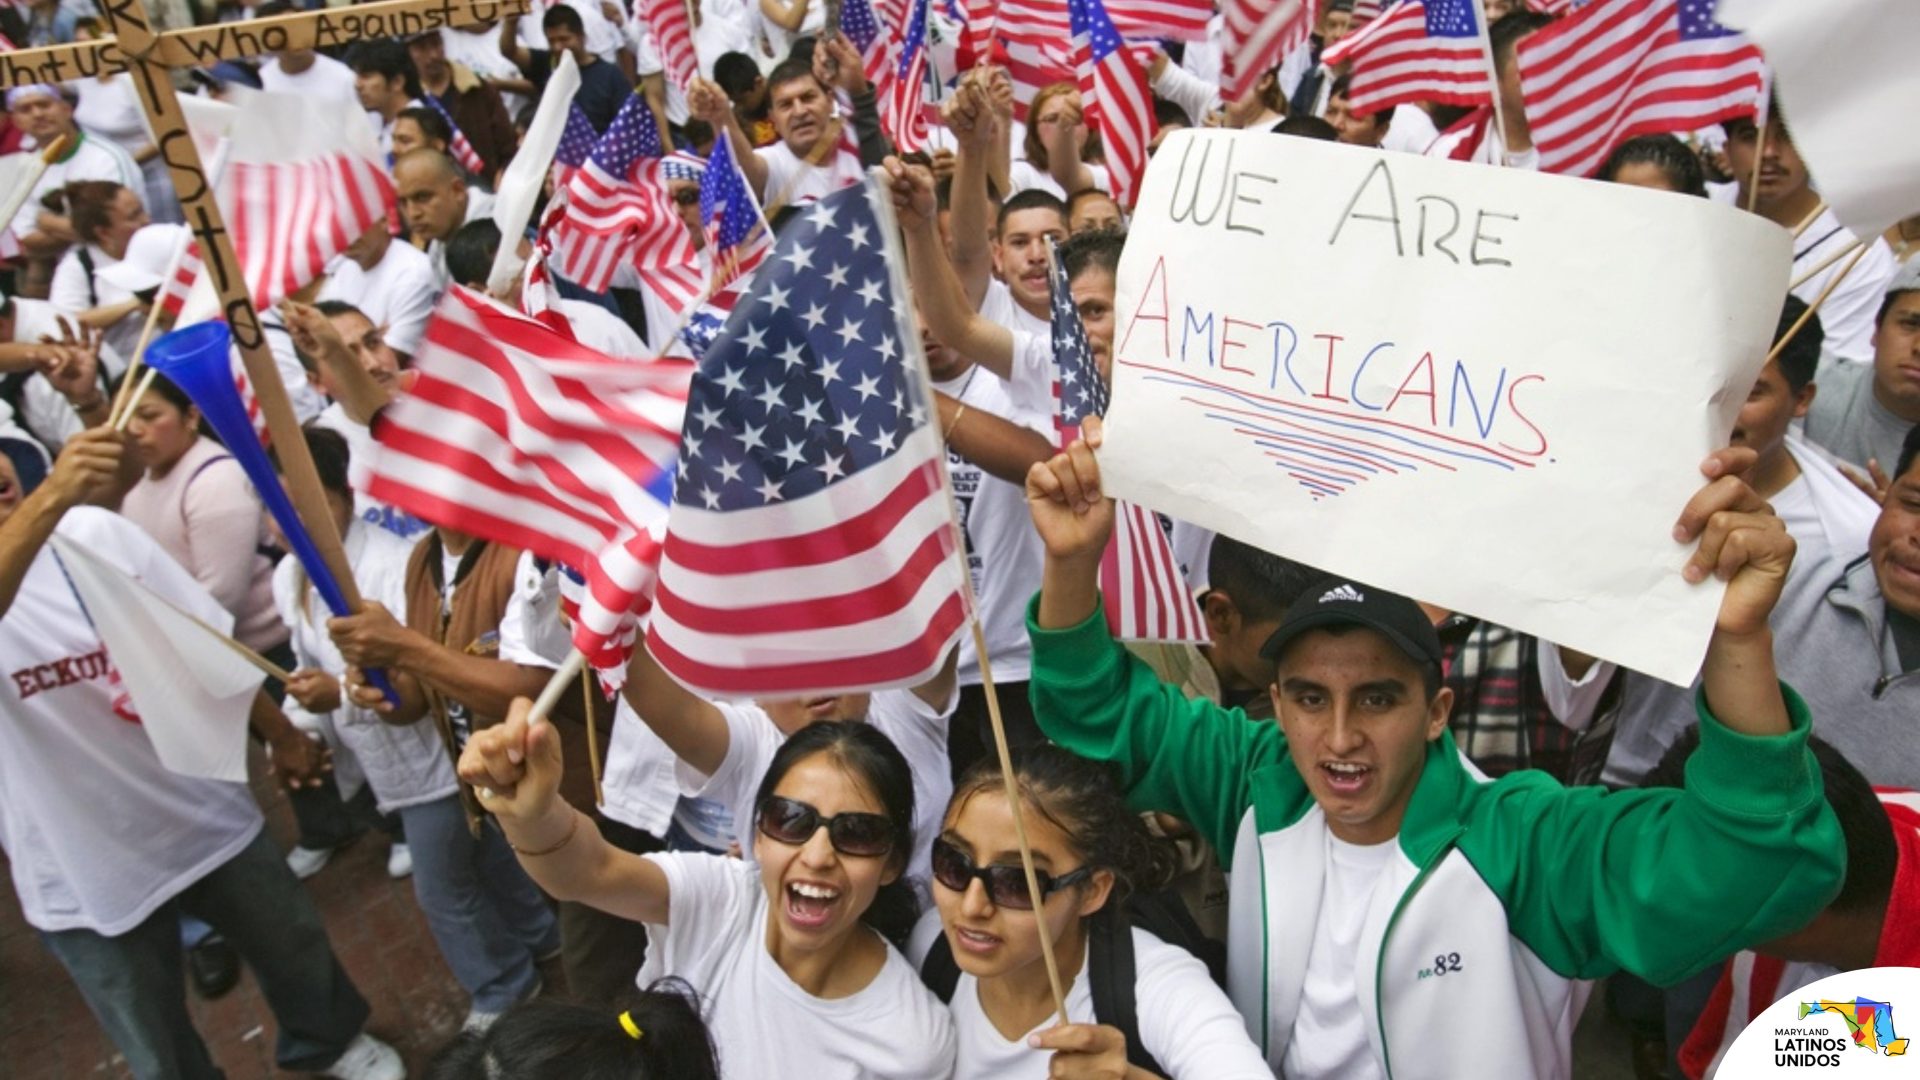 Latinos marching with signs of "We are Americans"